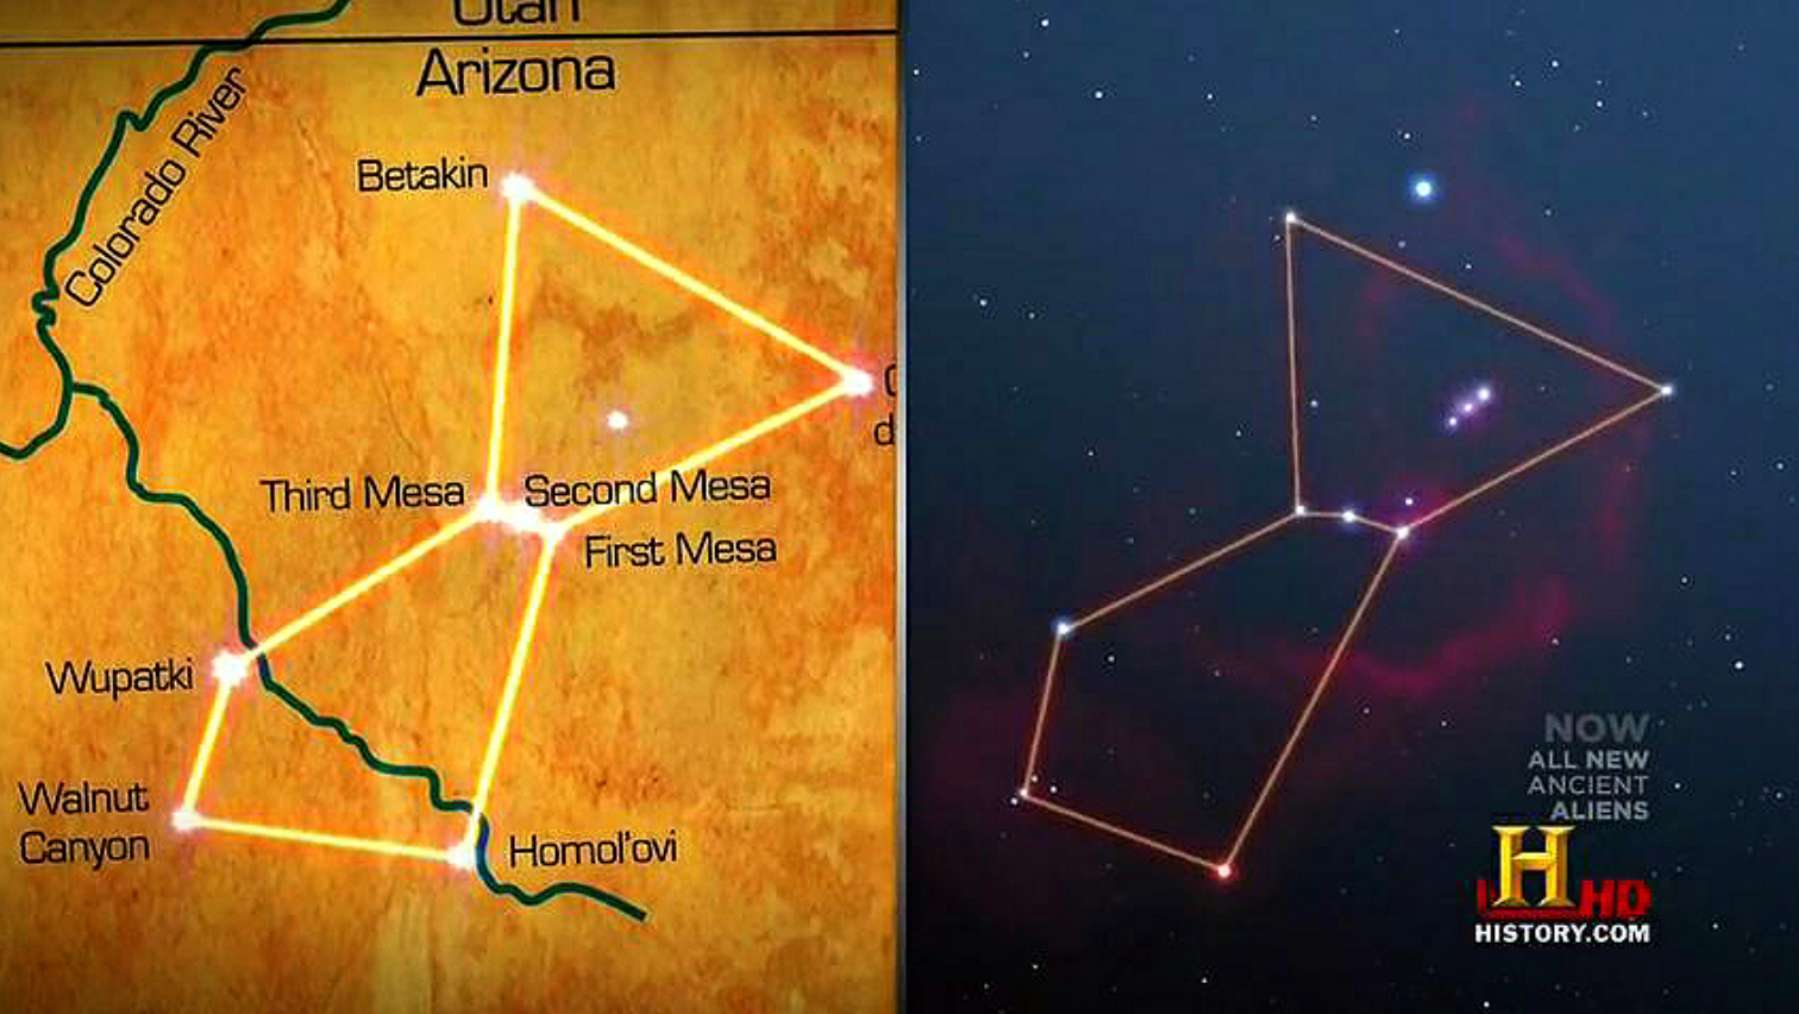 The three Hopi Mesas align “perfectly” with the constellation of Orion